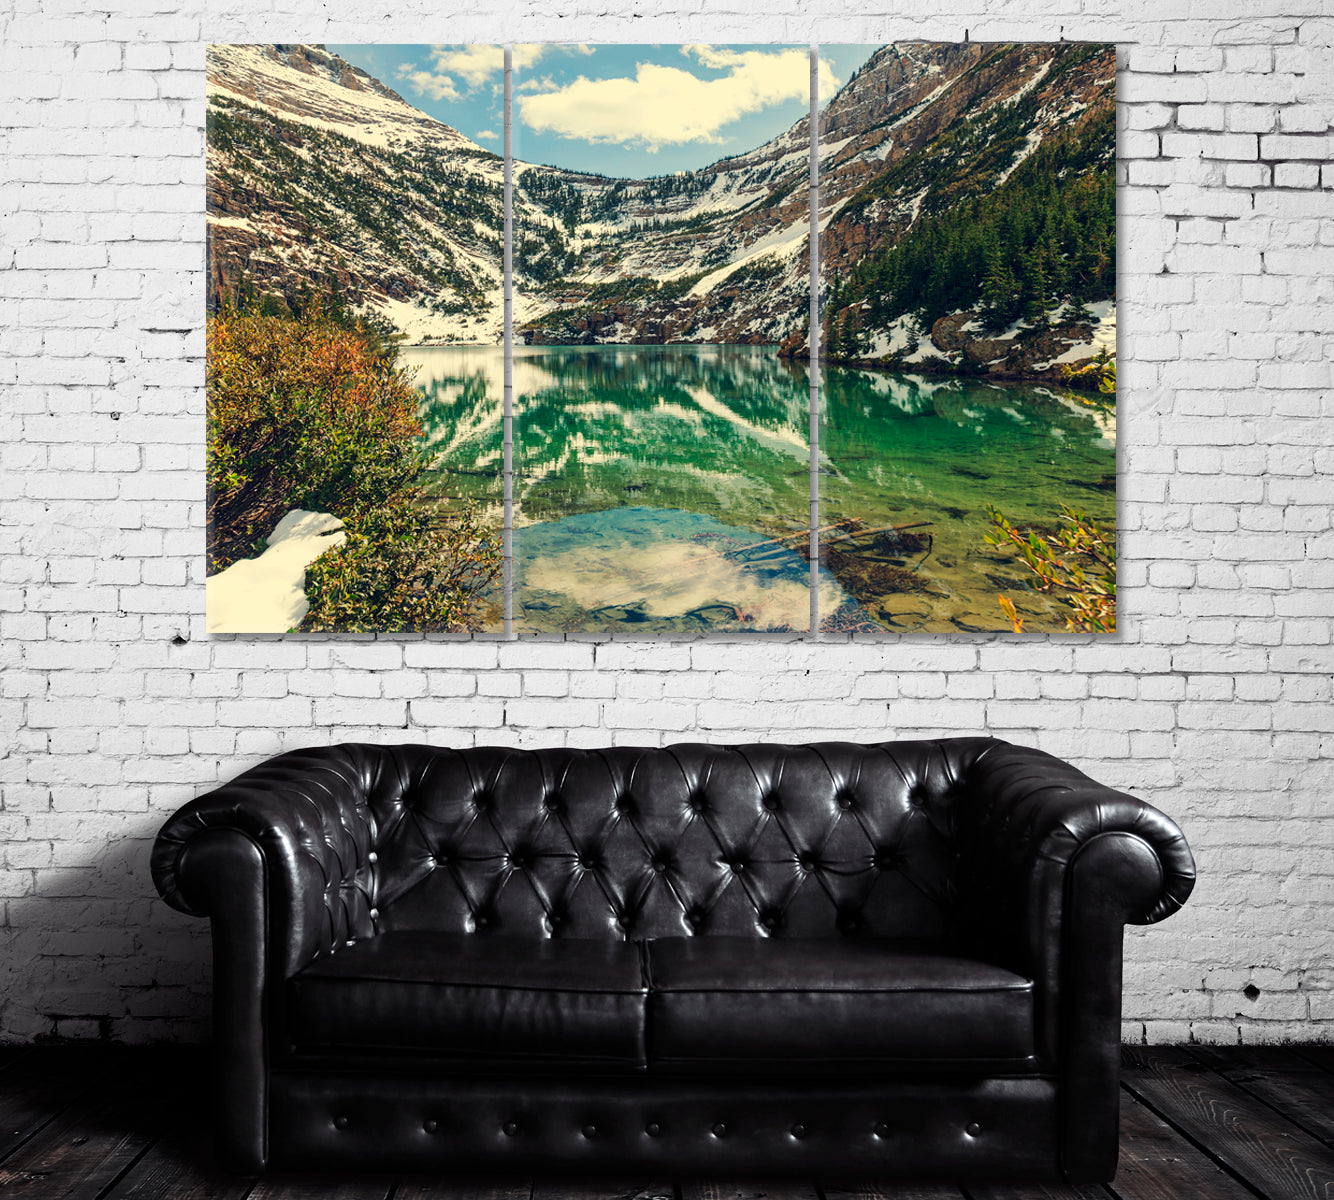 Hidden Lake in Glacier National Park Montana Canvas Print ArtLexy 3 Panels 36"x24" inches 